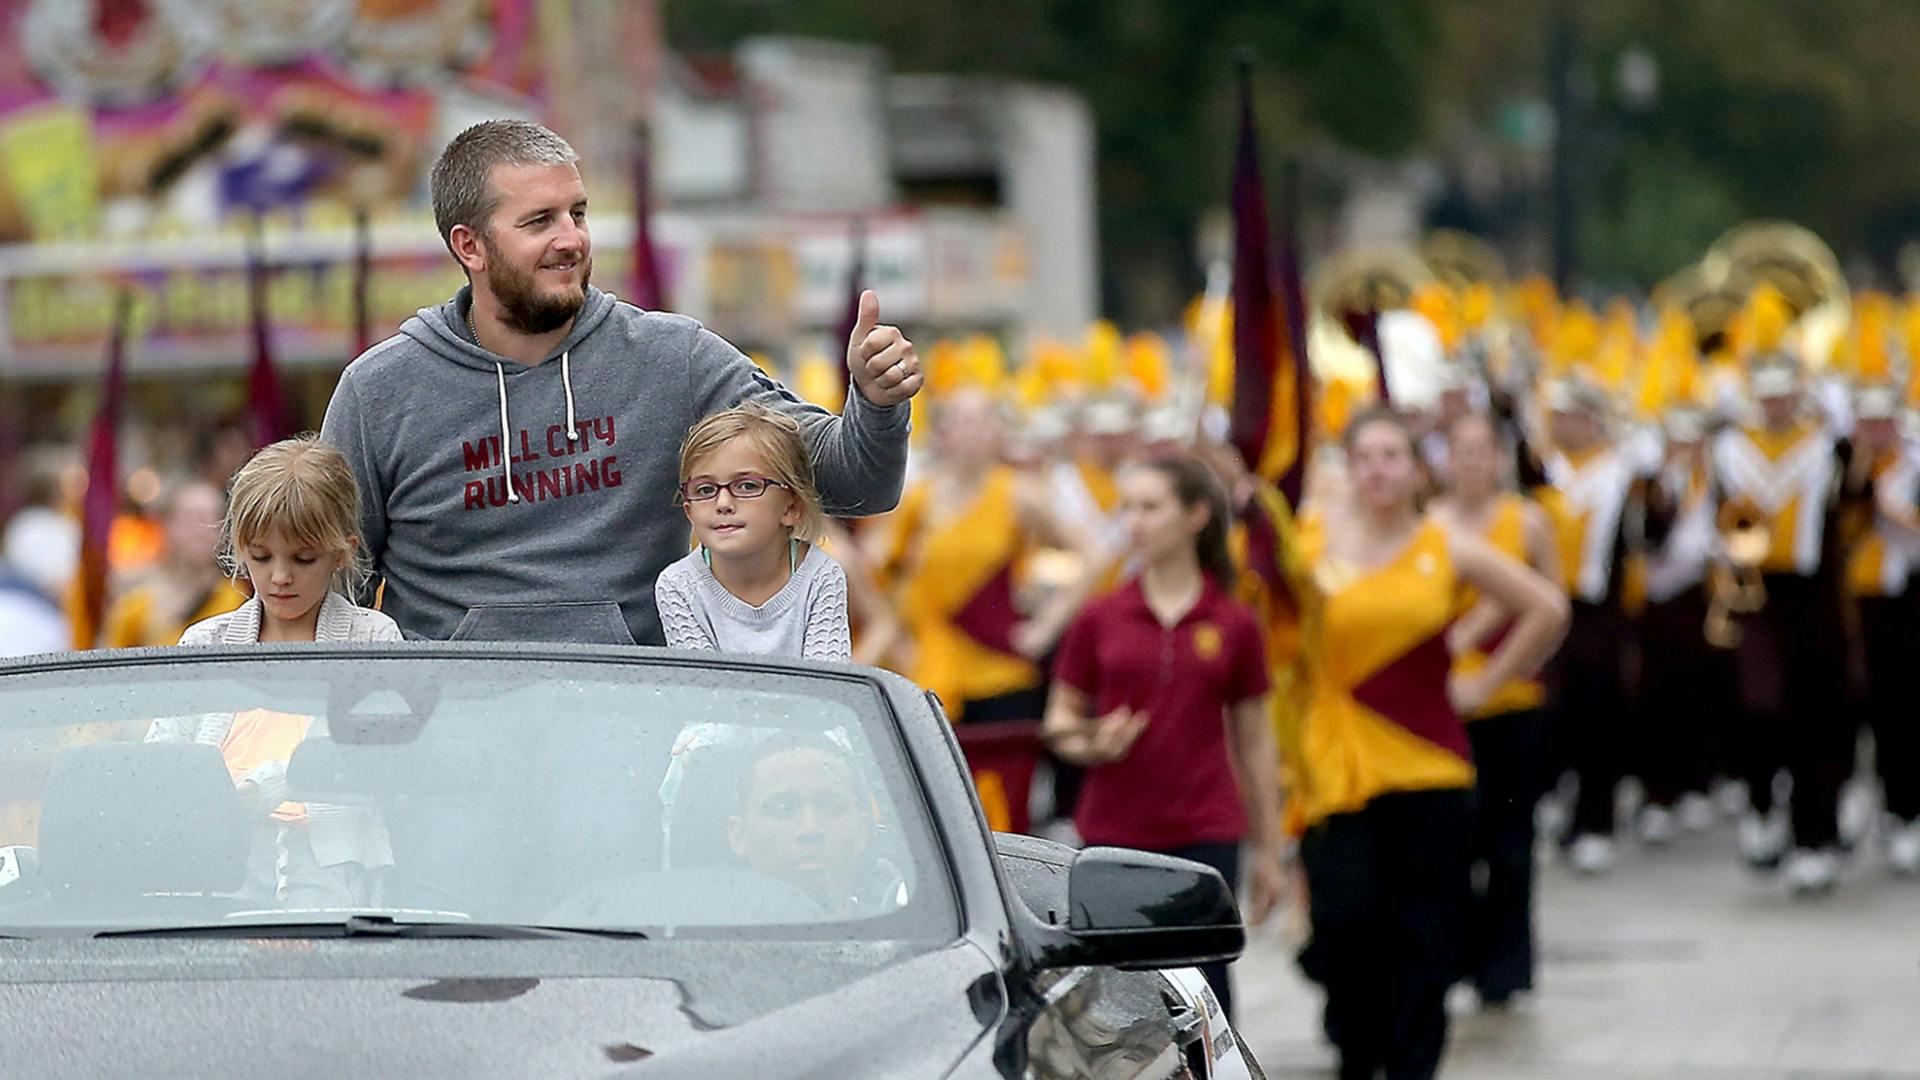 The Twins pitcher was the Gophers' VIP representative in Tuesday's parade.